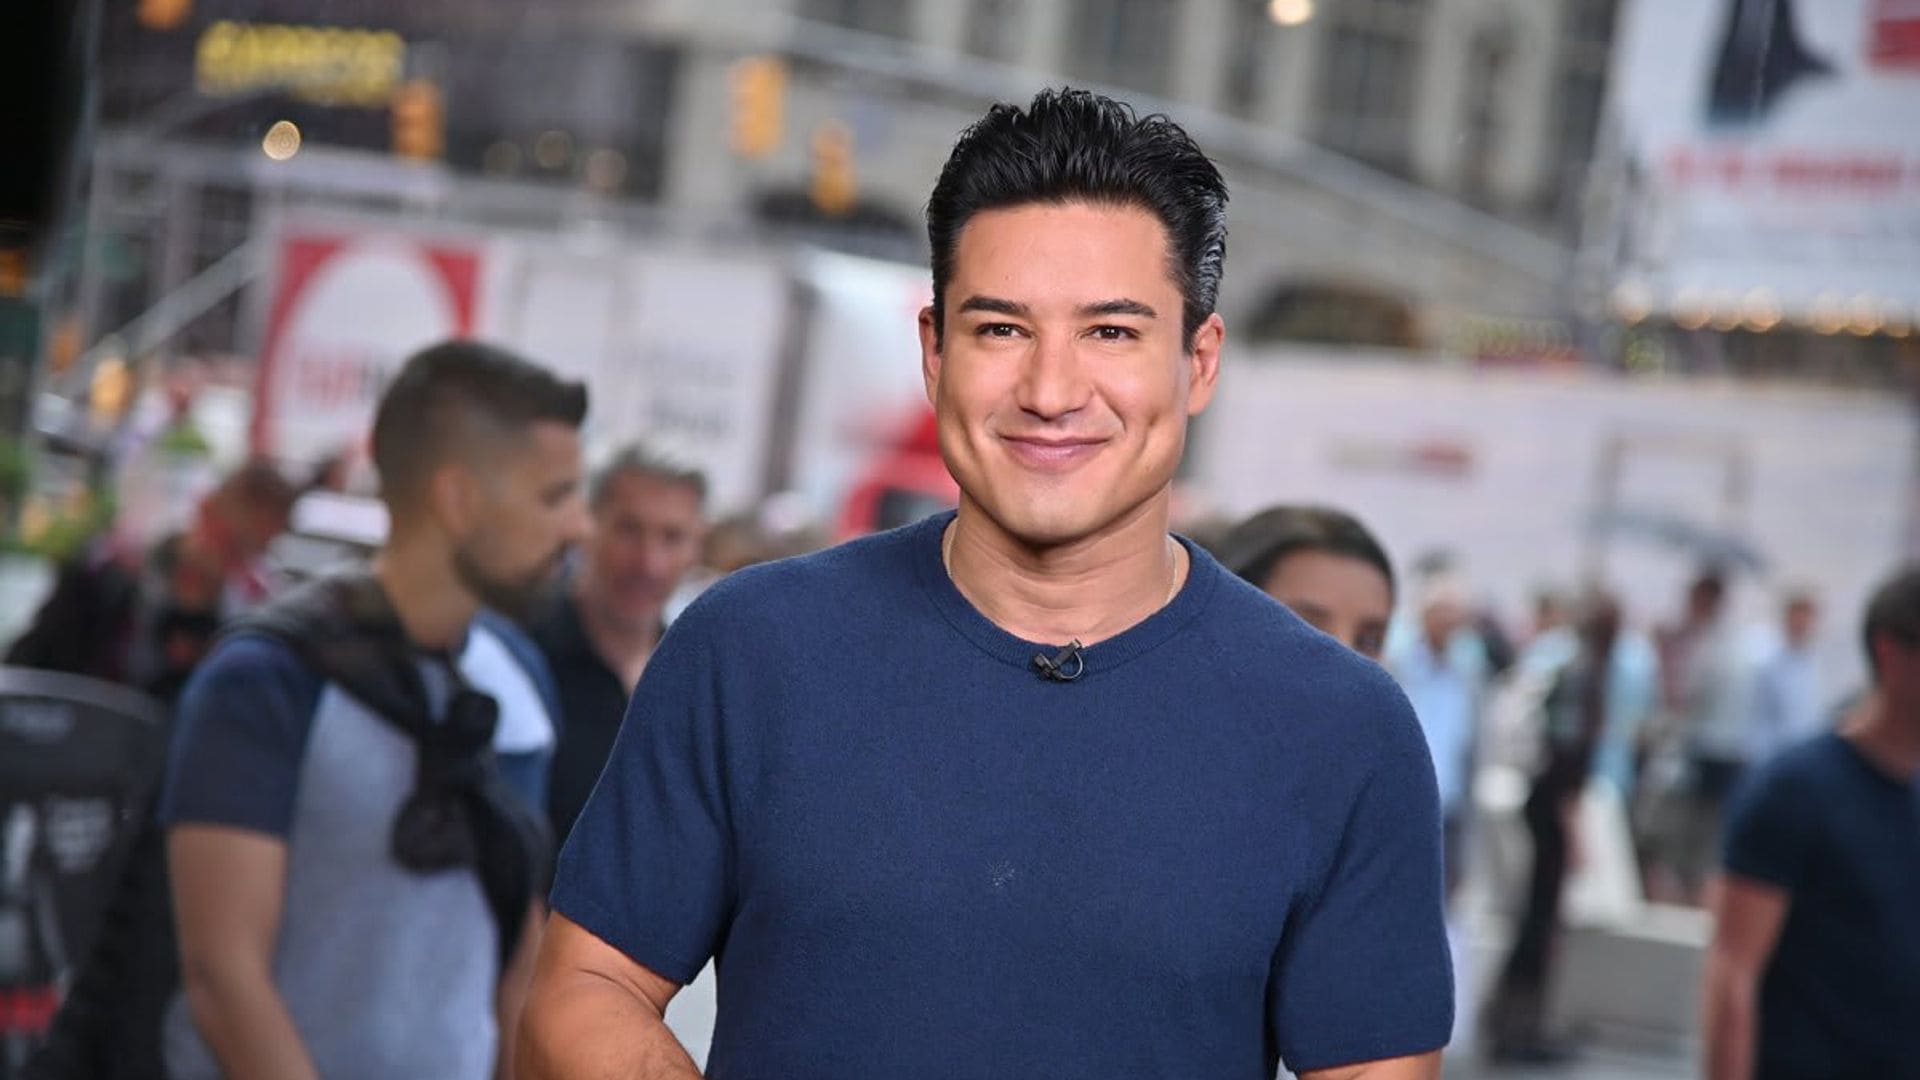 Mario Lopez celebrates his birthday shirtless and looking better than ever